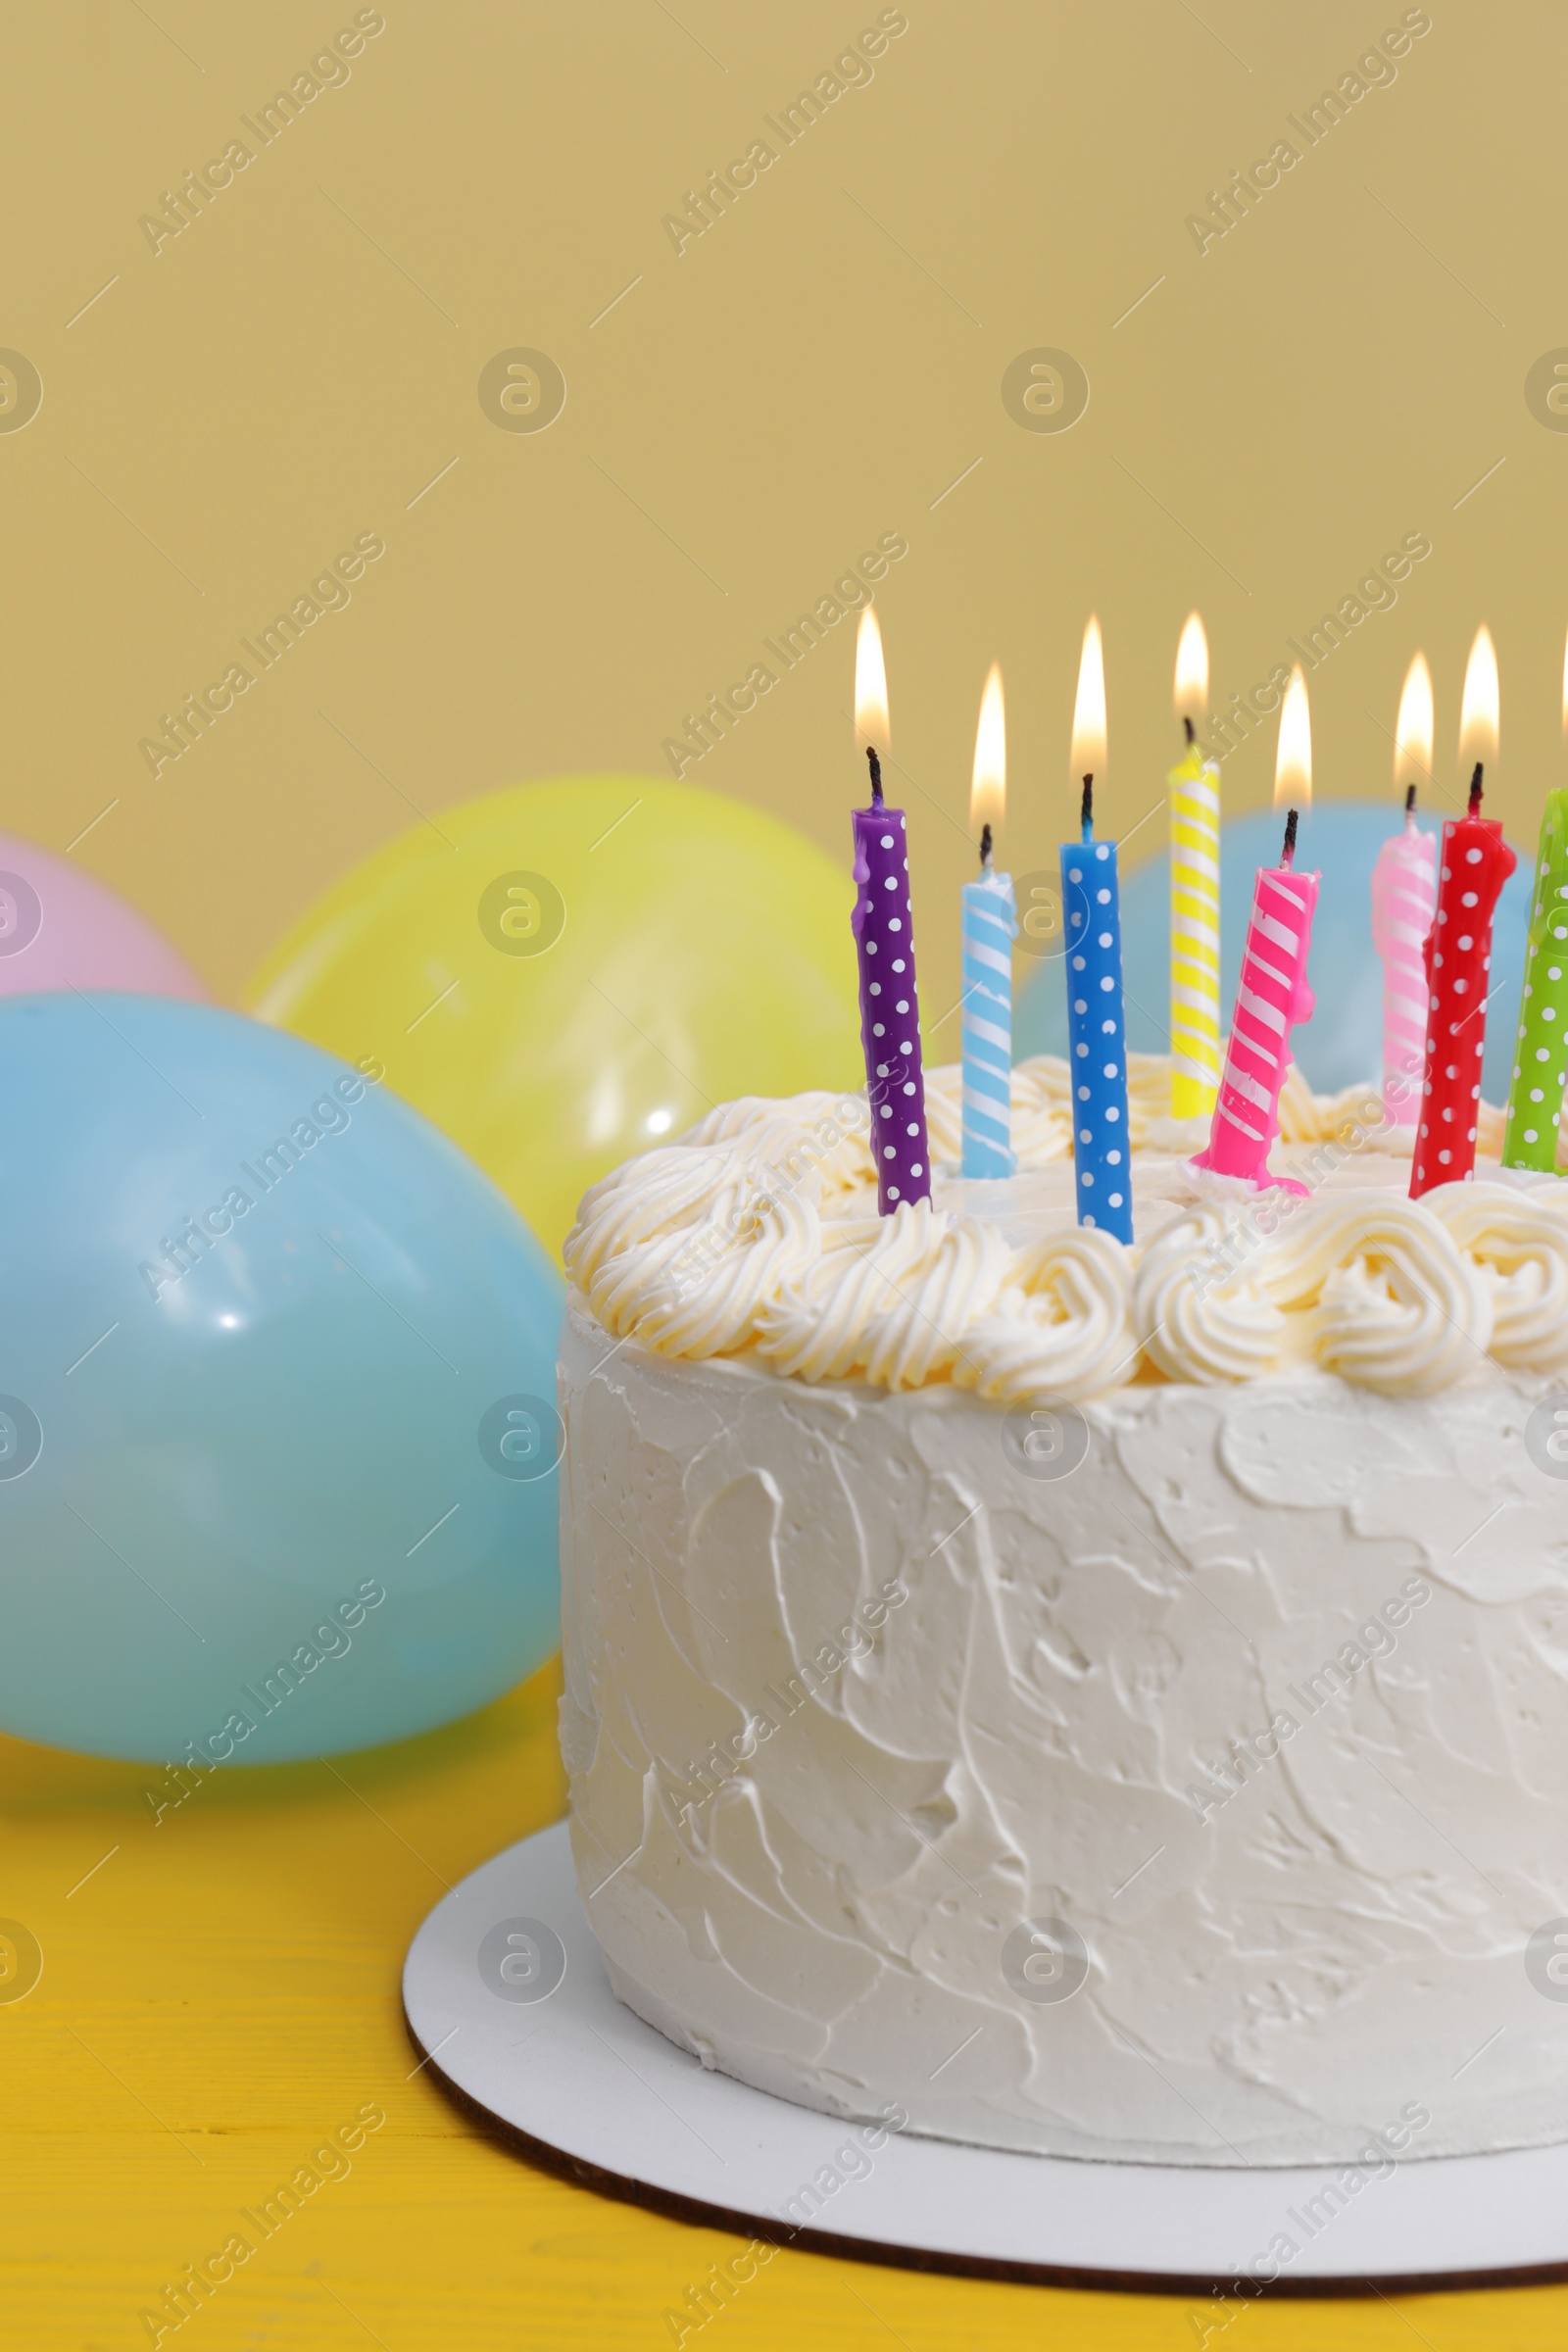 Photo of Delicious cake with burning candles and festive decor on yellow background, closeup